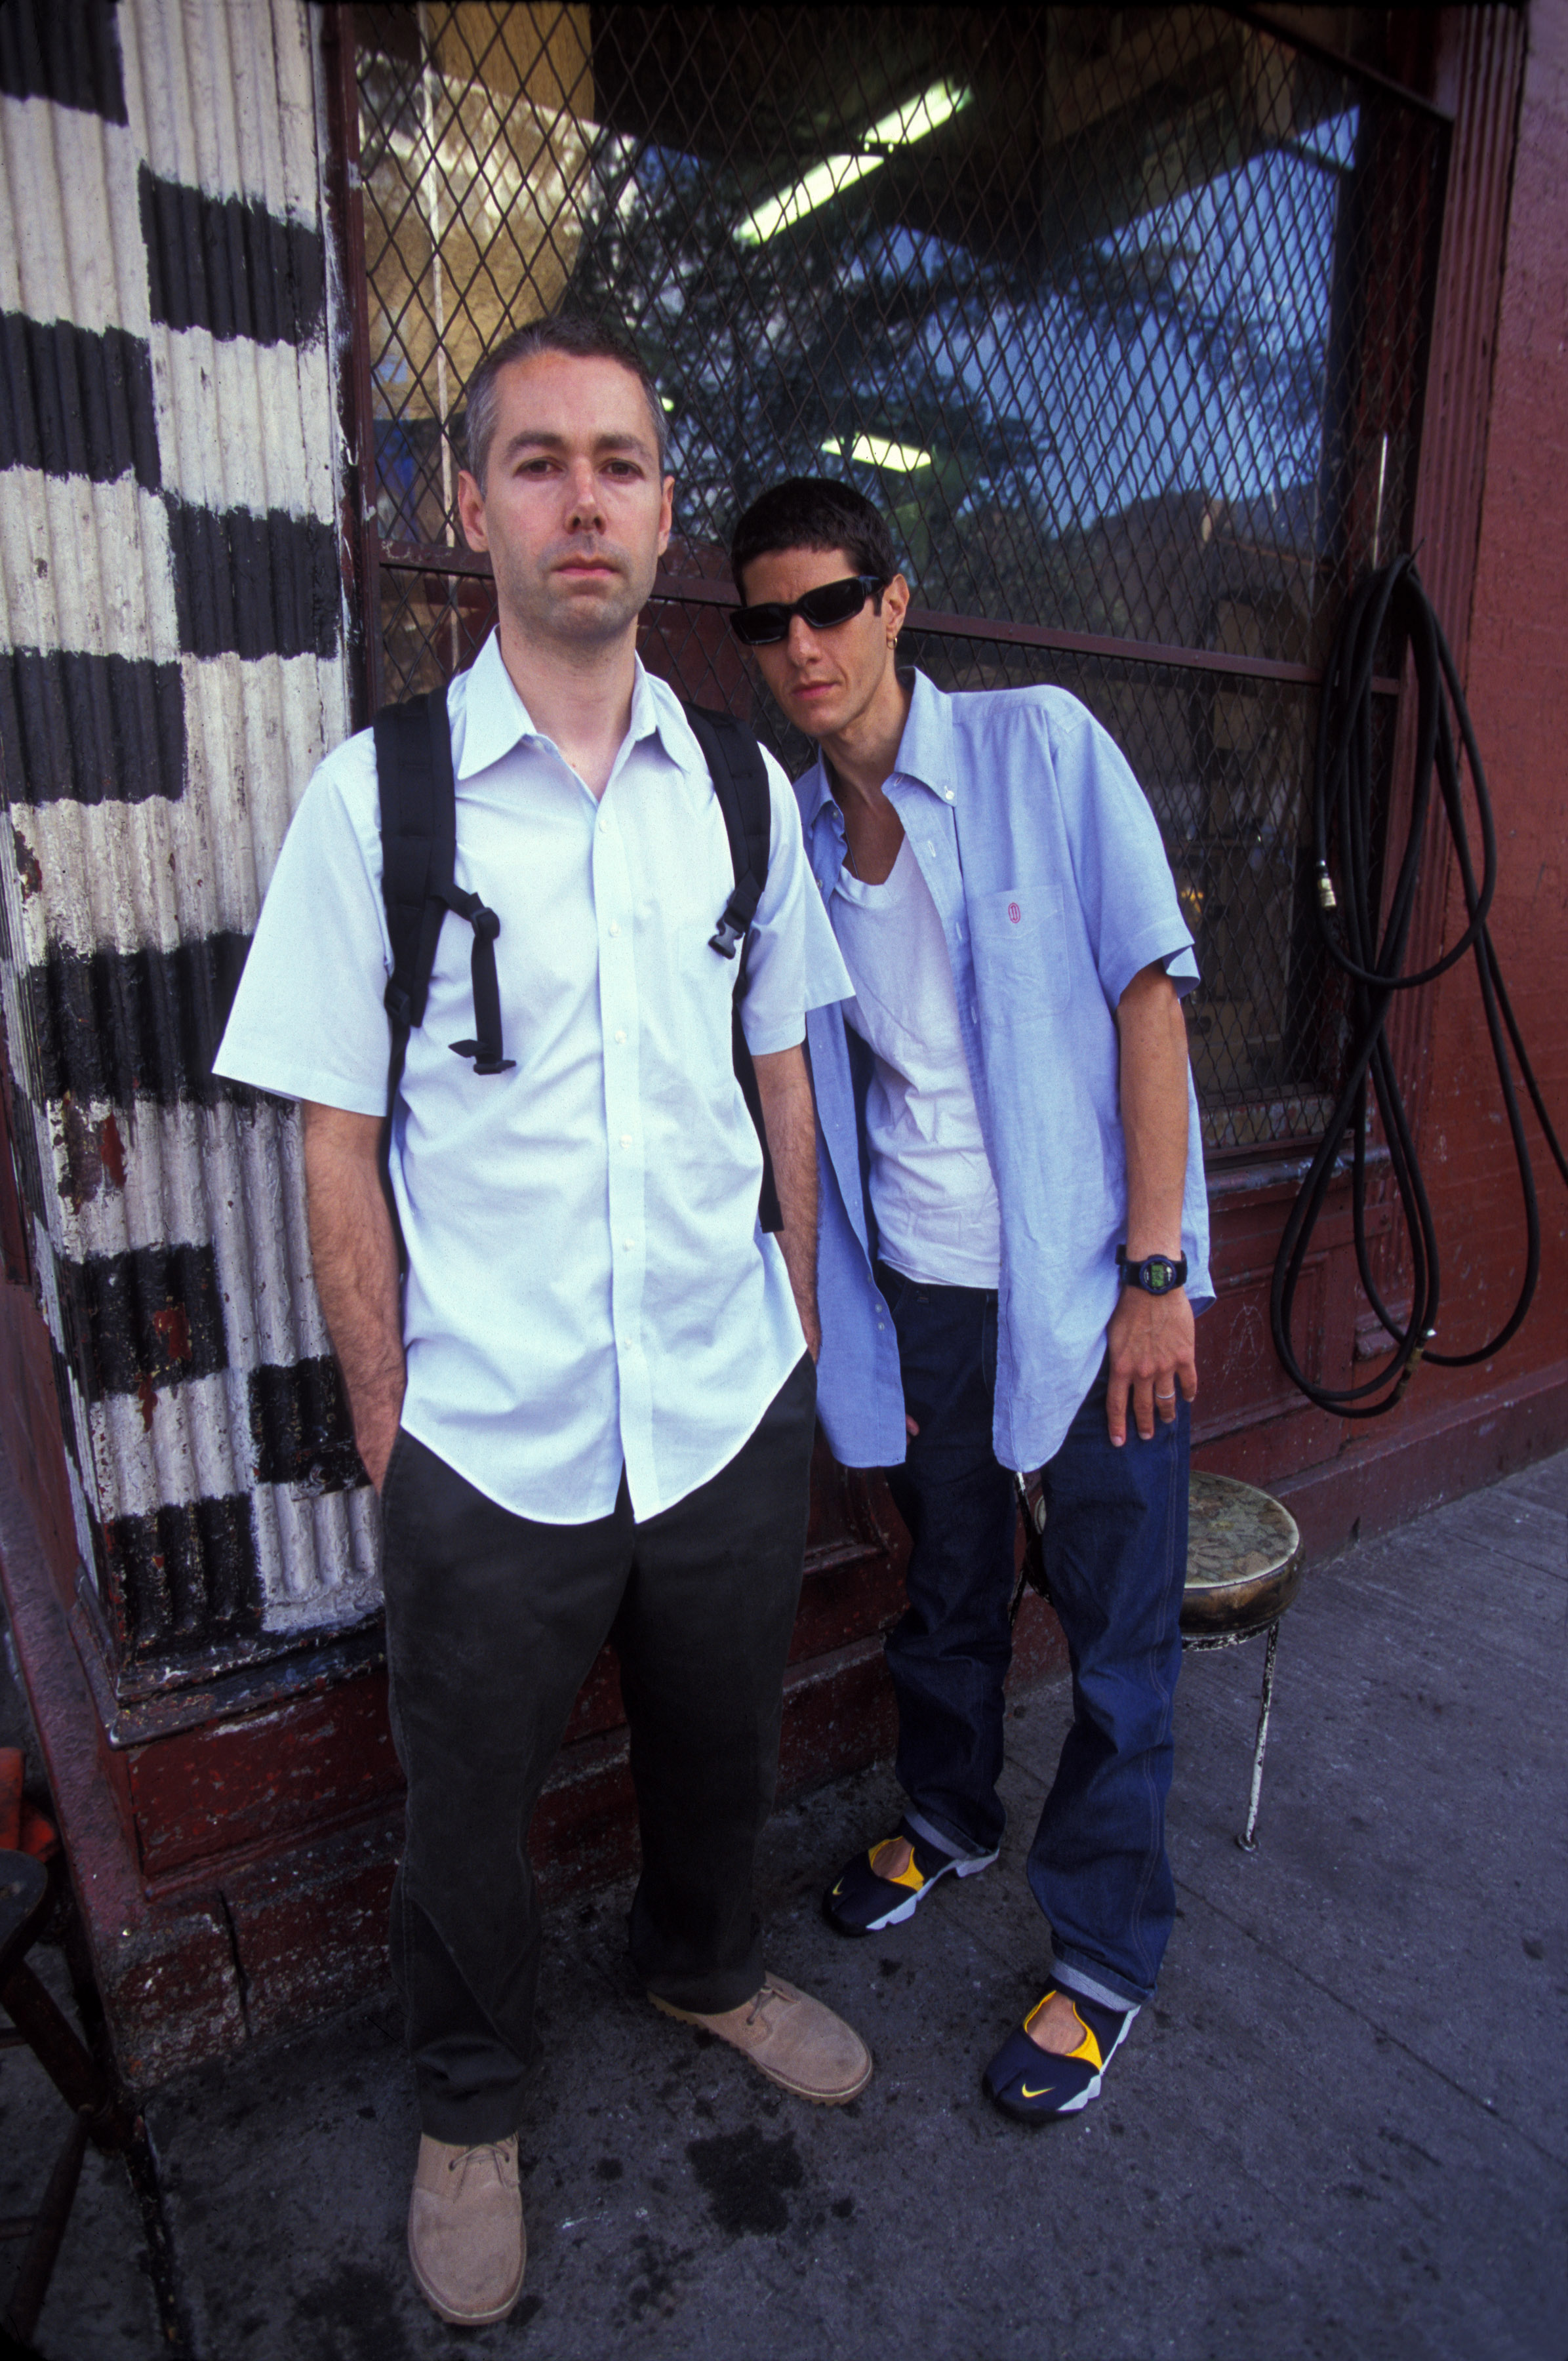 Adam Yauch and Mike Diamond of The Beastie Boys in New York, September 14, 2000.